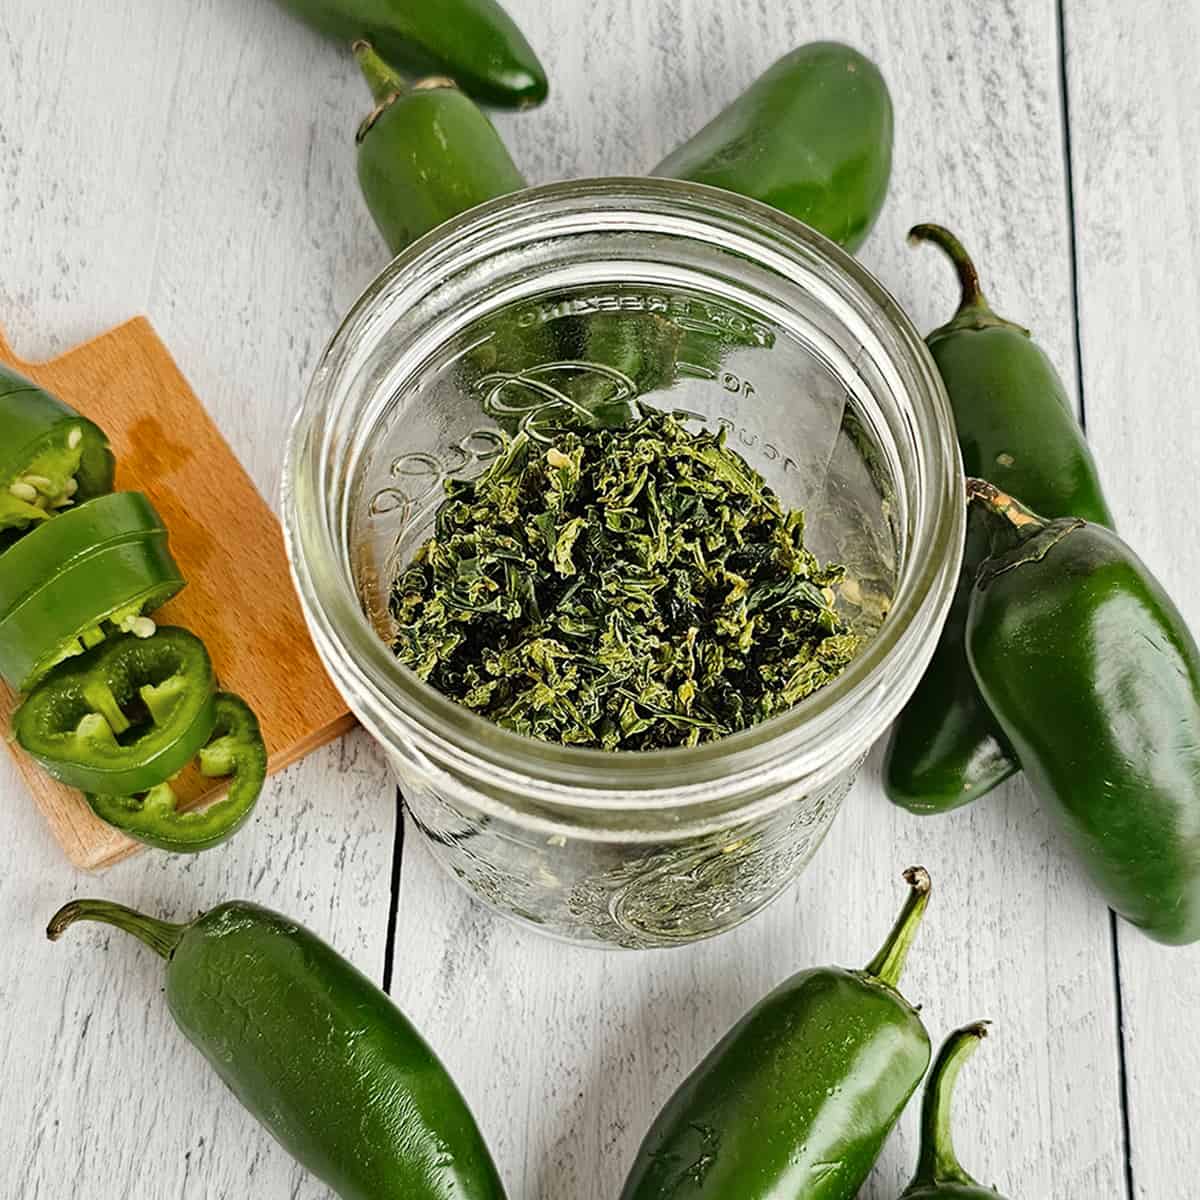 How to Dehydrate Jalapeno Peppers